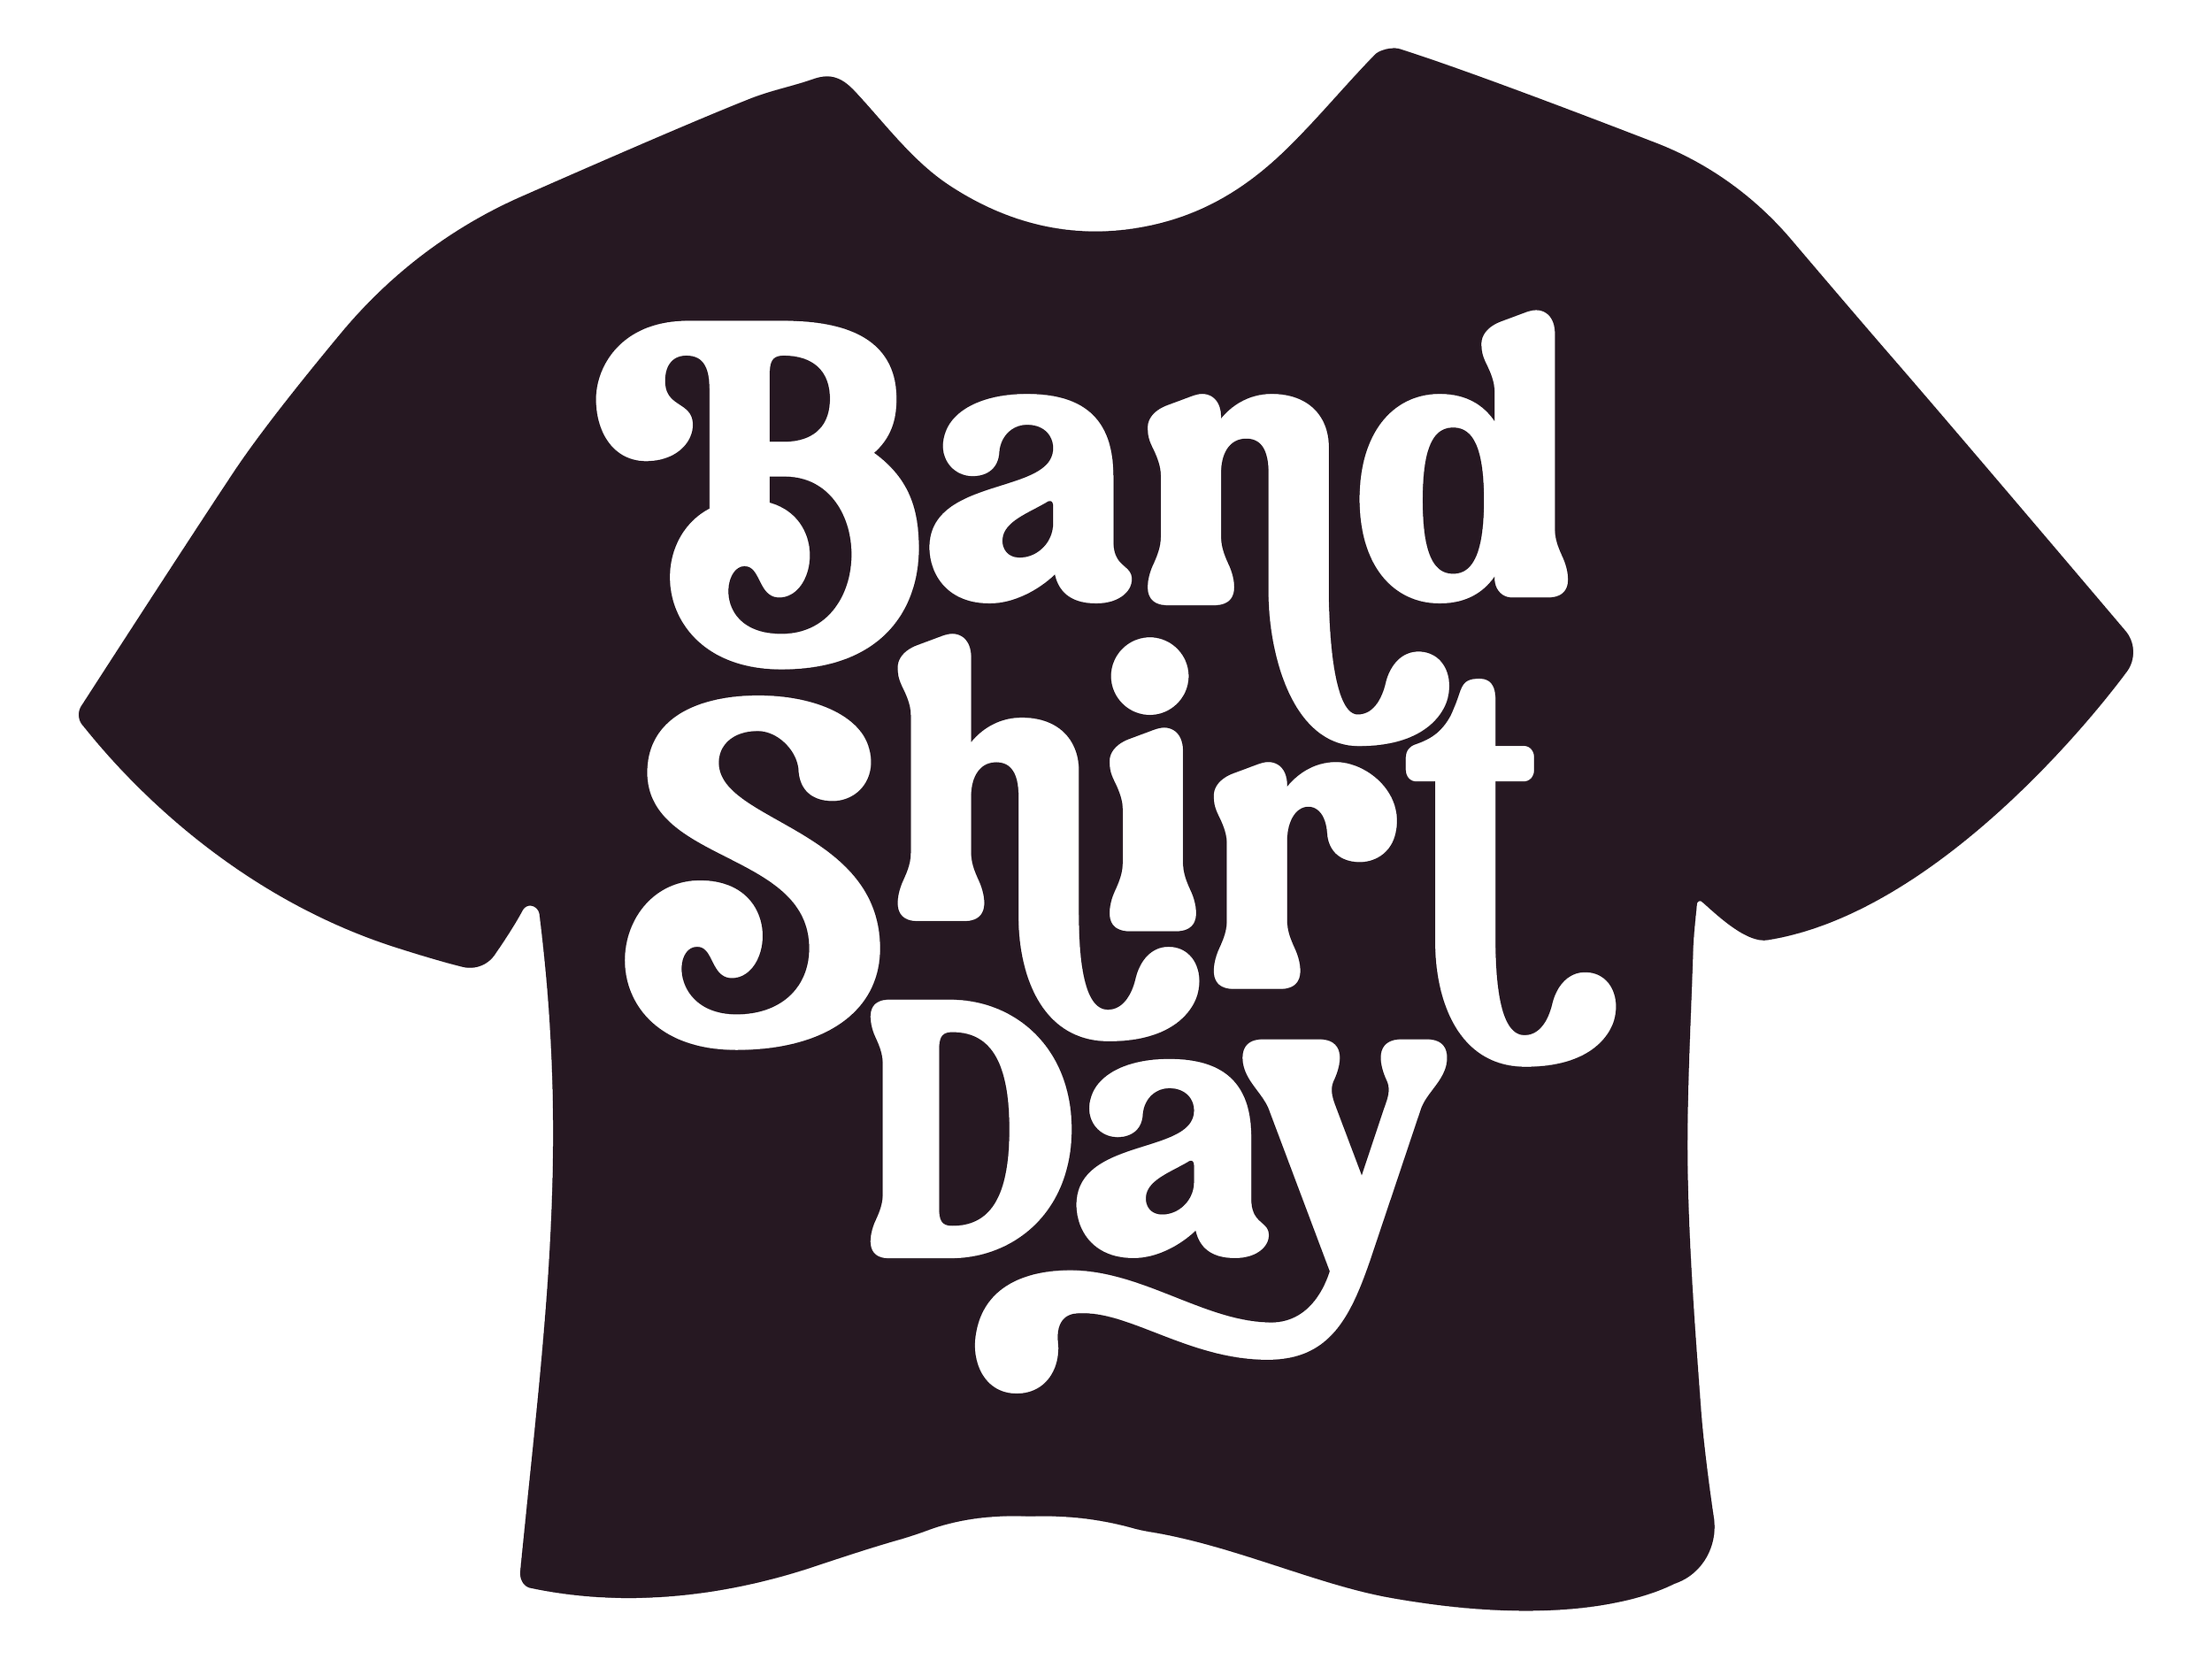 Band Shirt Day is September 15th, 2023